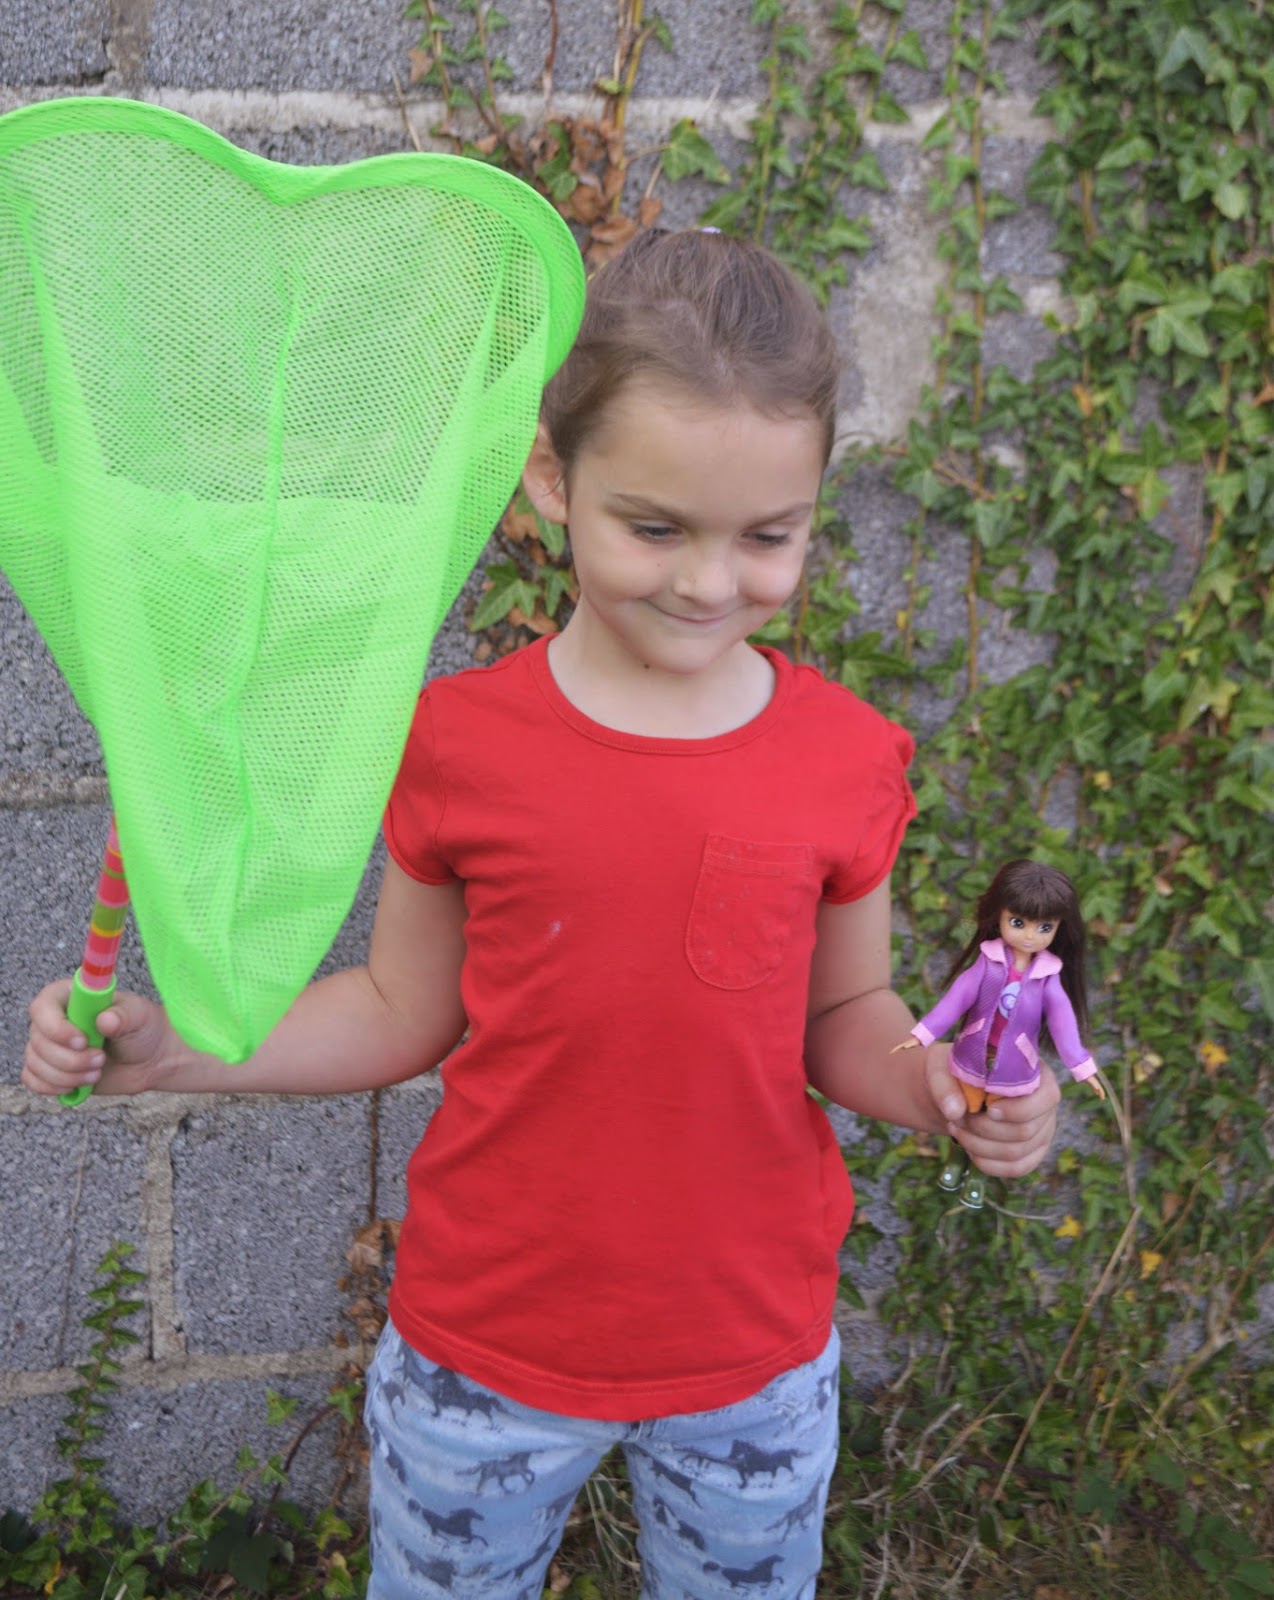 , Butterfly Protector Lottie Doll Review and Giveaway